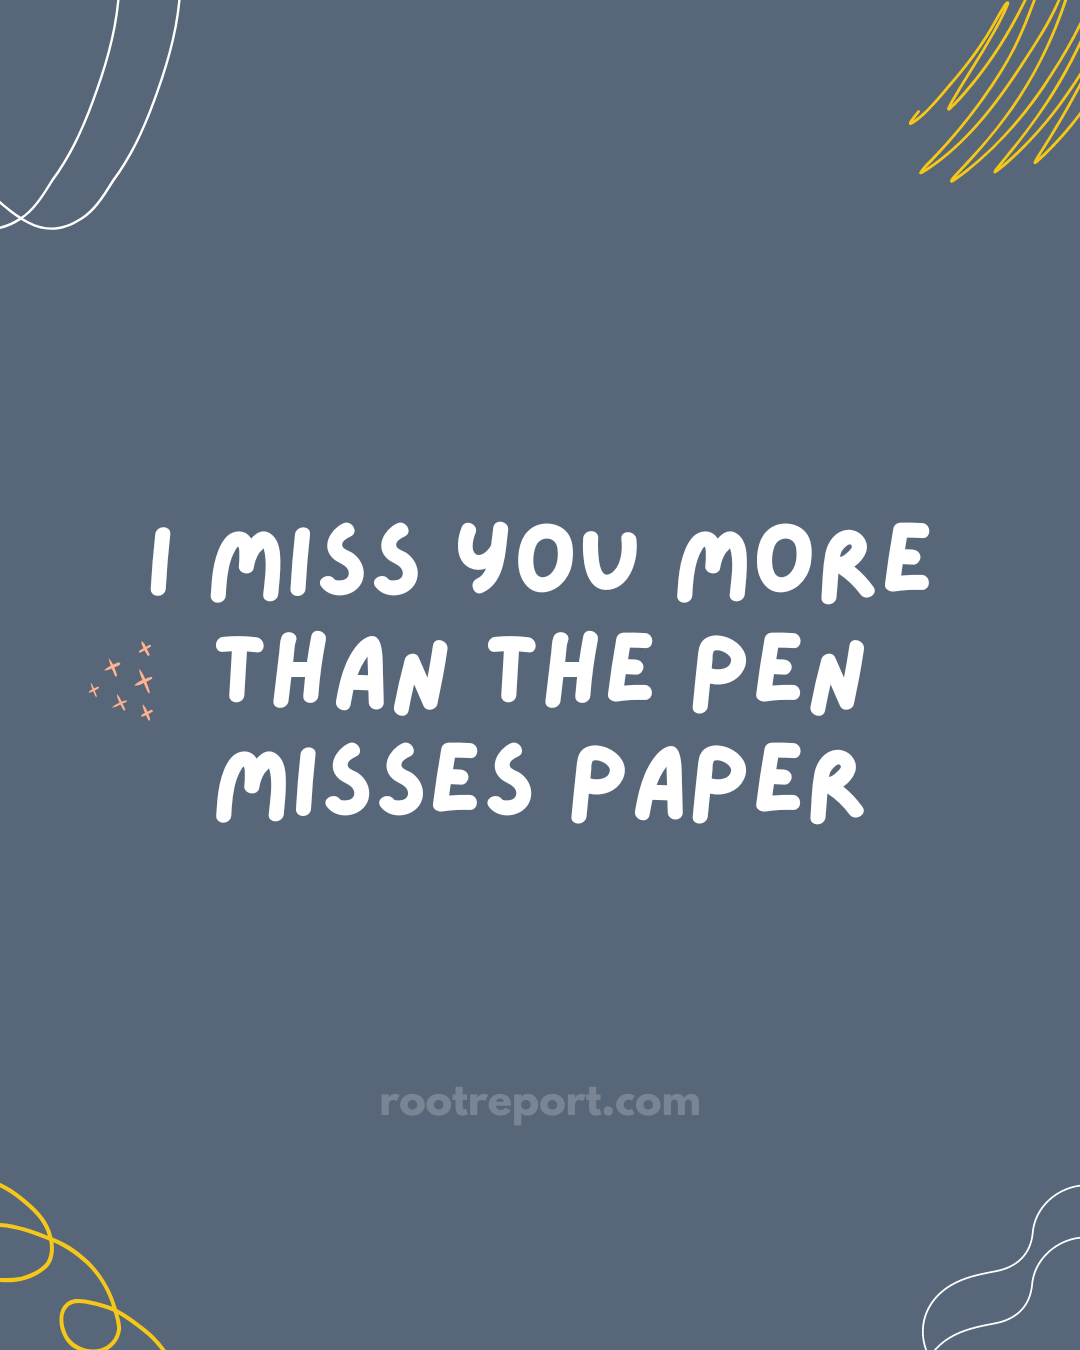 I miss you more than the pen misses paper.